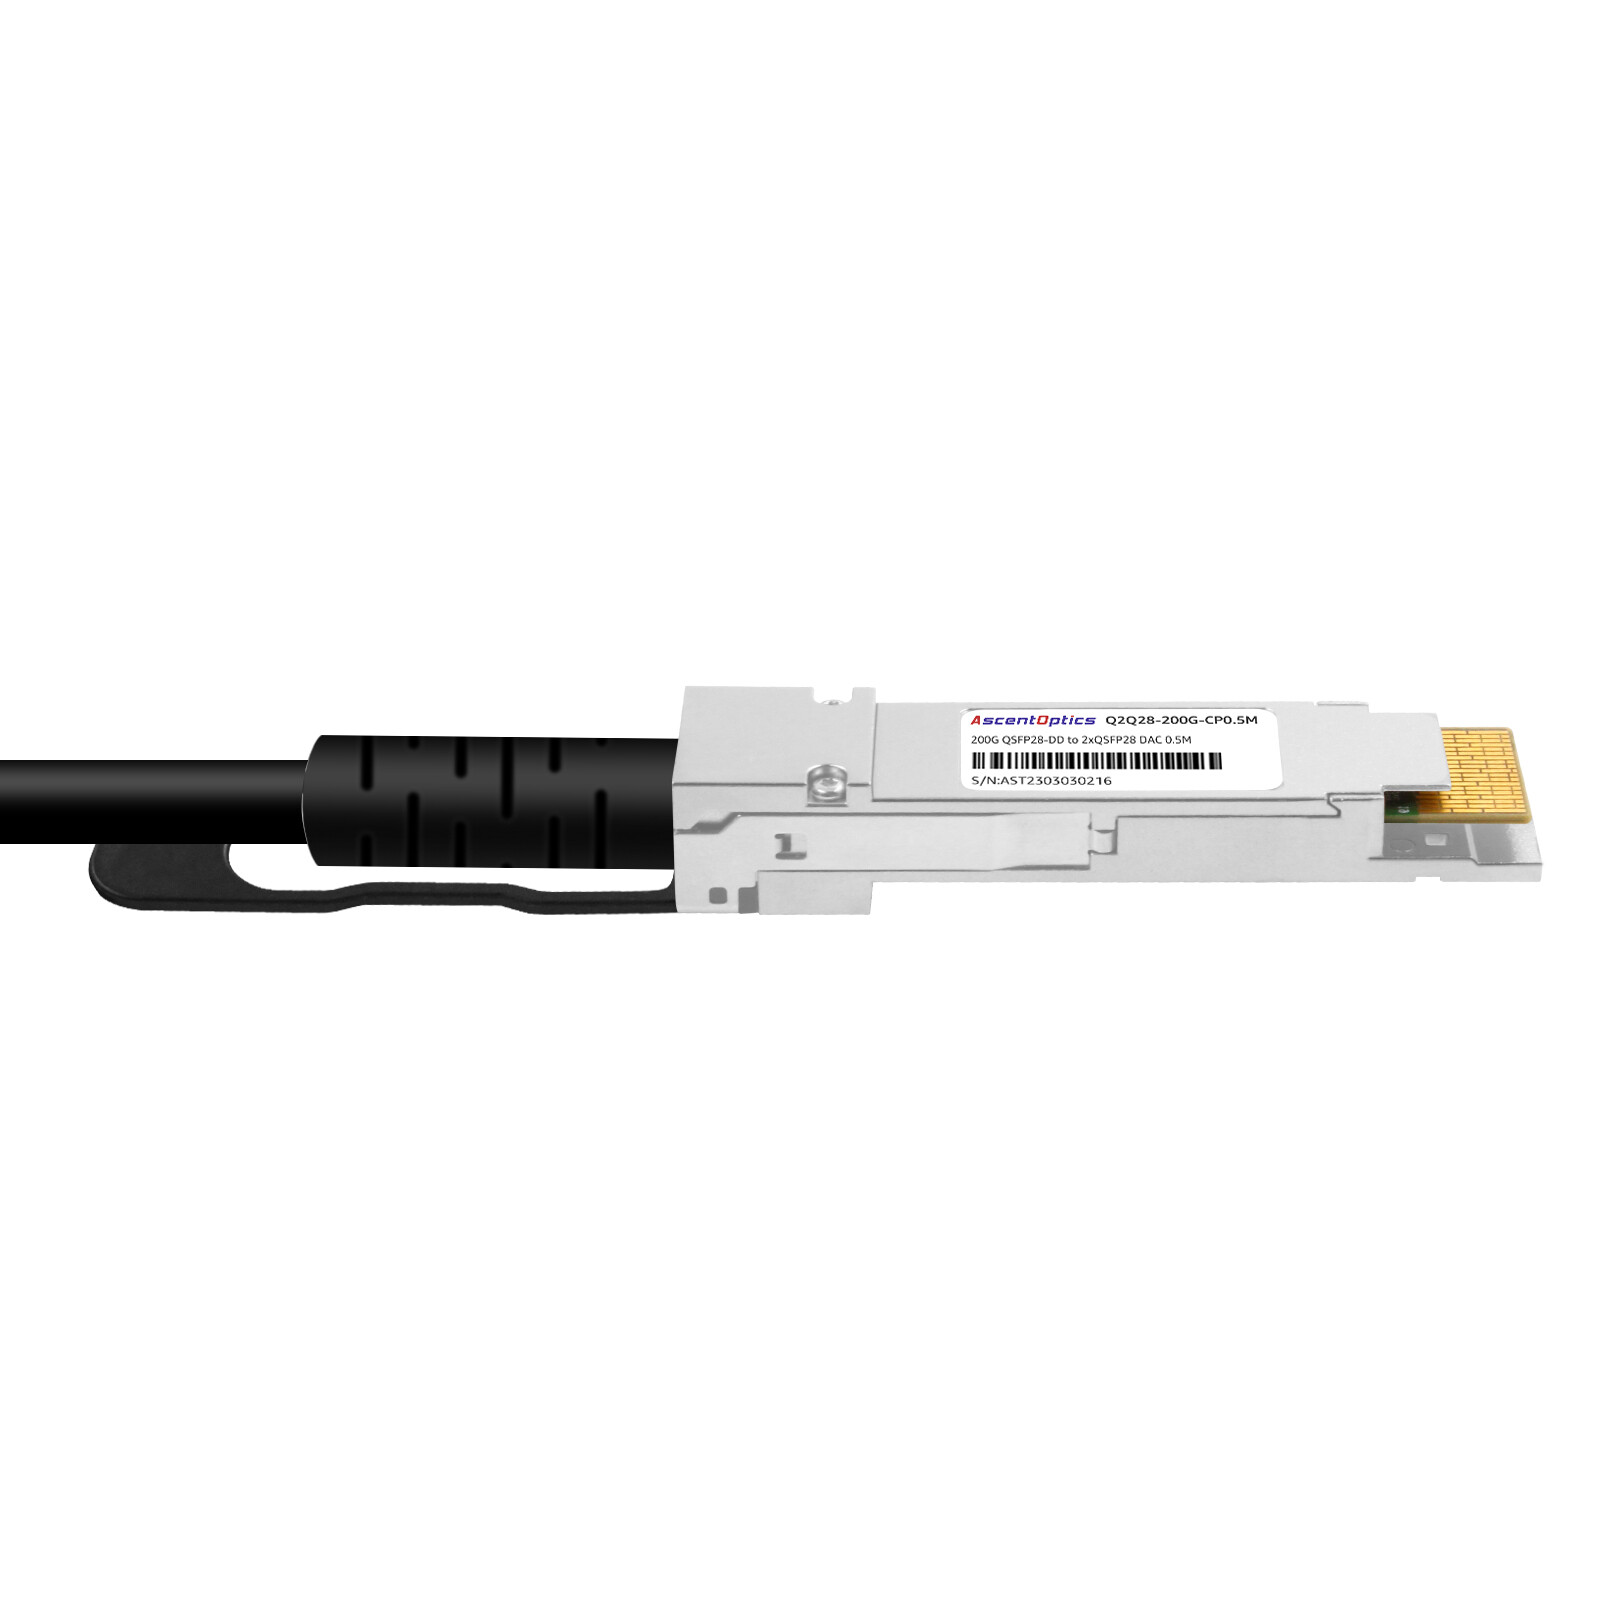 200G QSFP28-DD to 2x 100G QSFP28 Copper Breakout Cable,0.5 Meter,Passive